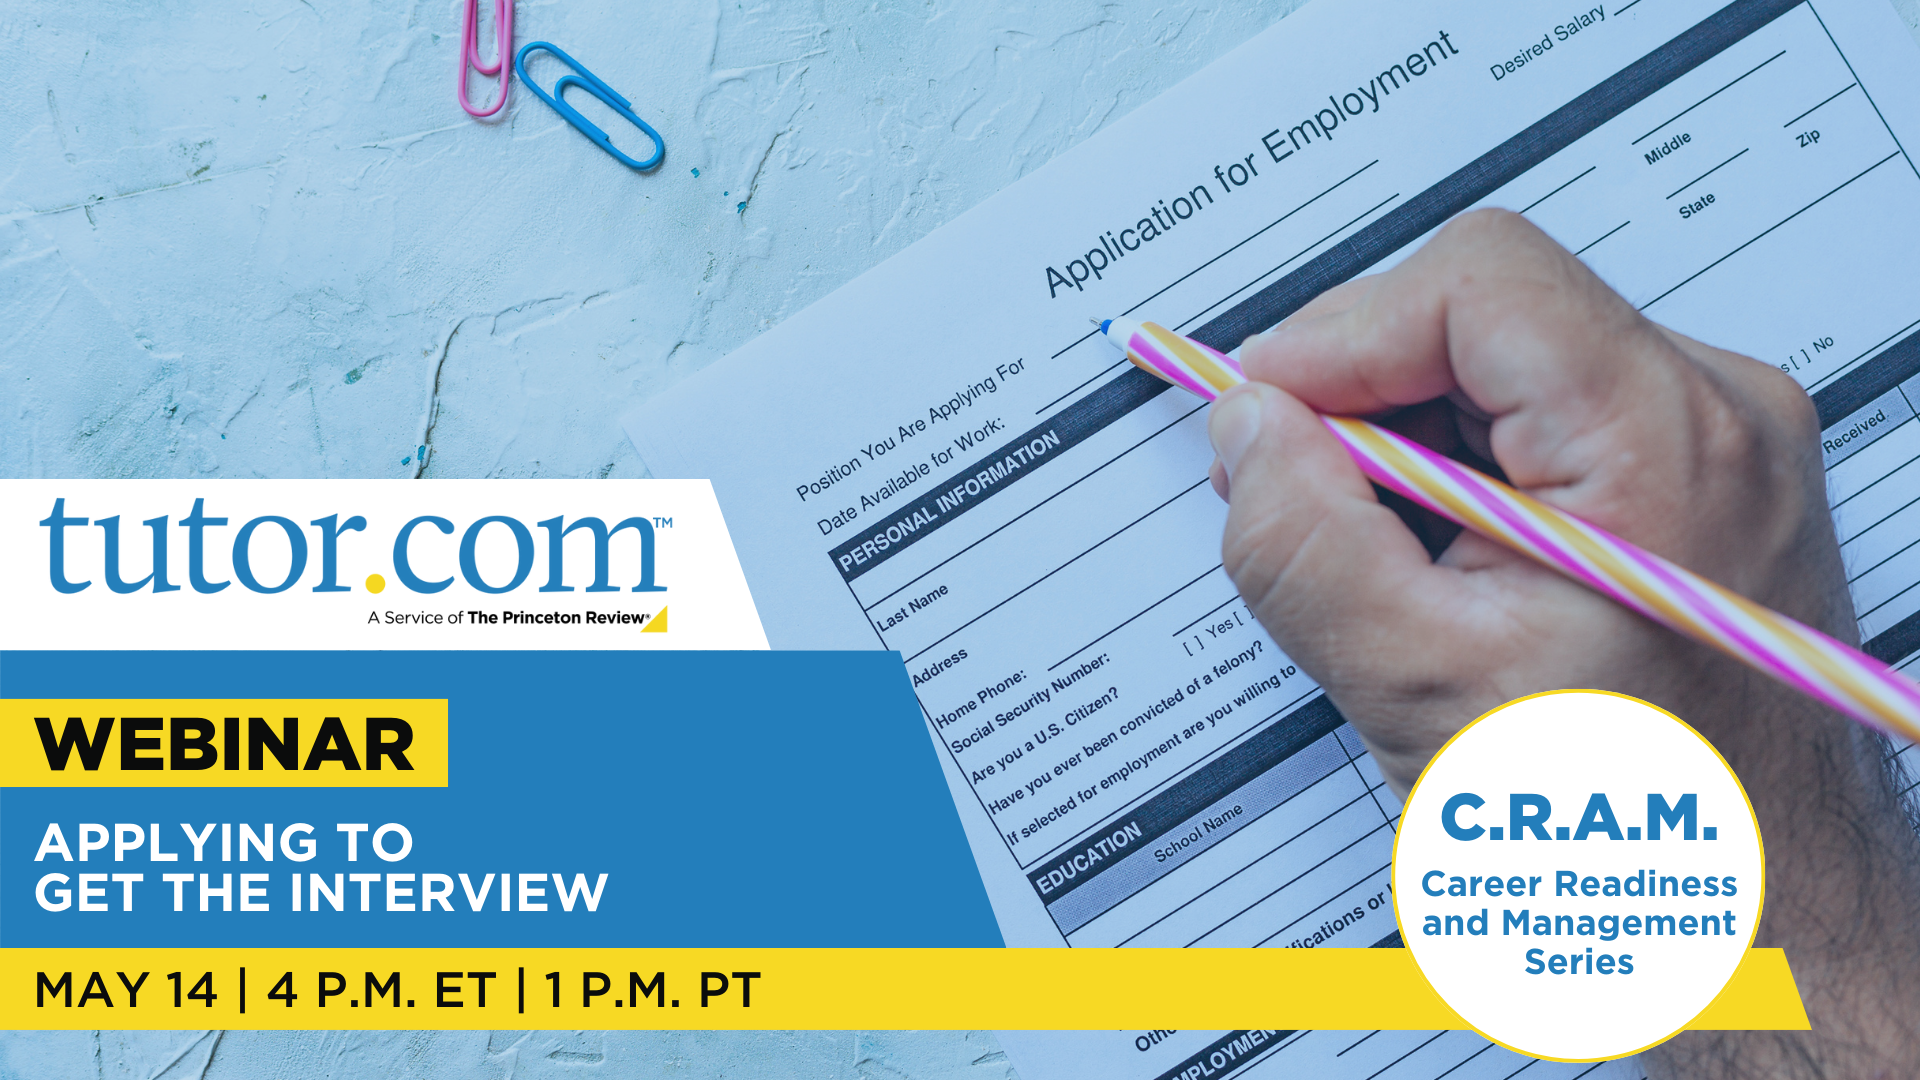 Tutor.com: A Service of The Princeton Review, Webinar: Applying to Get the Interview, May 14 | 4 P.M. ET | 1 P.M. PT, C.R.A.M. (Career Readiness and Management) Series